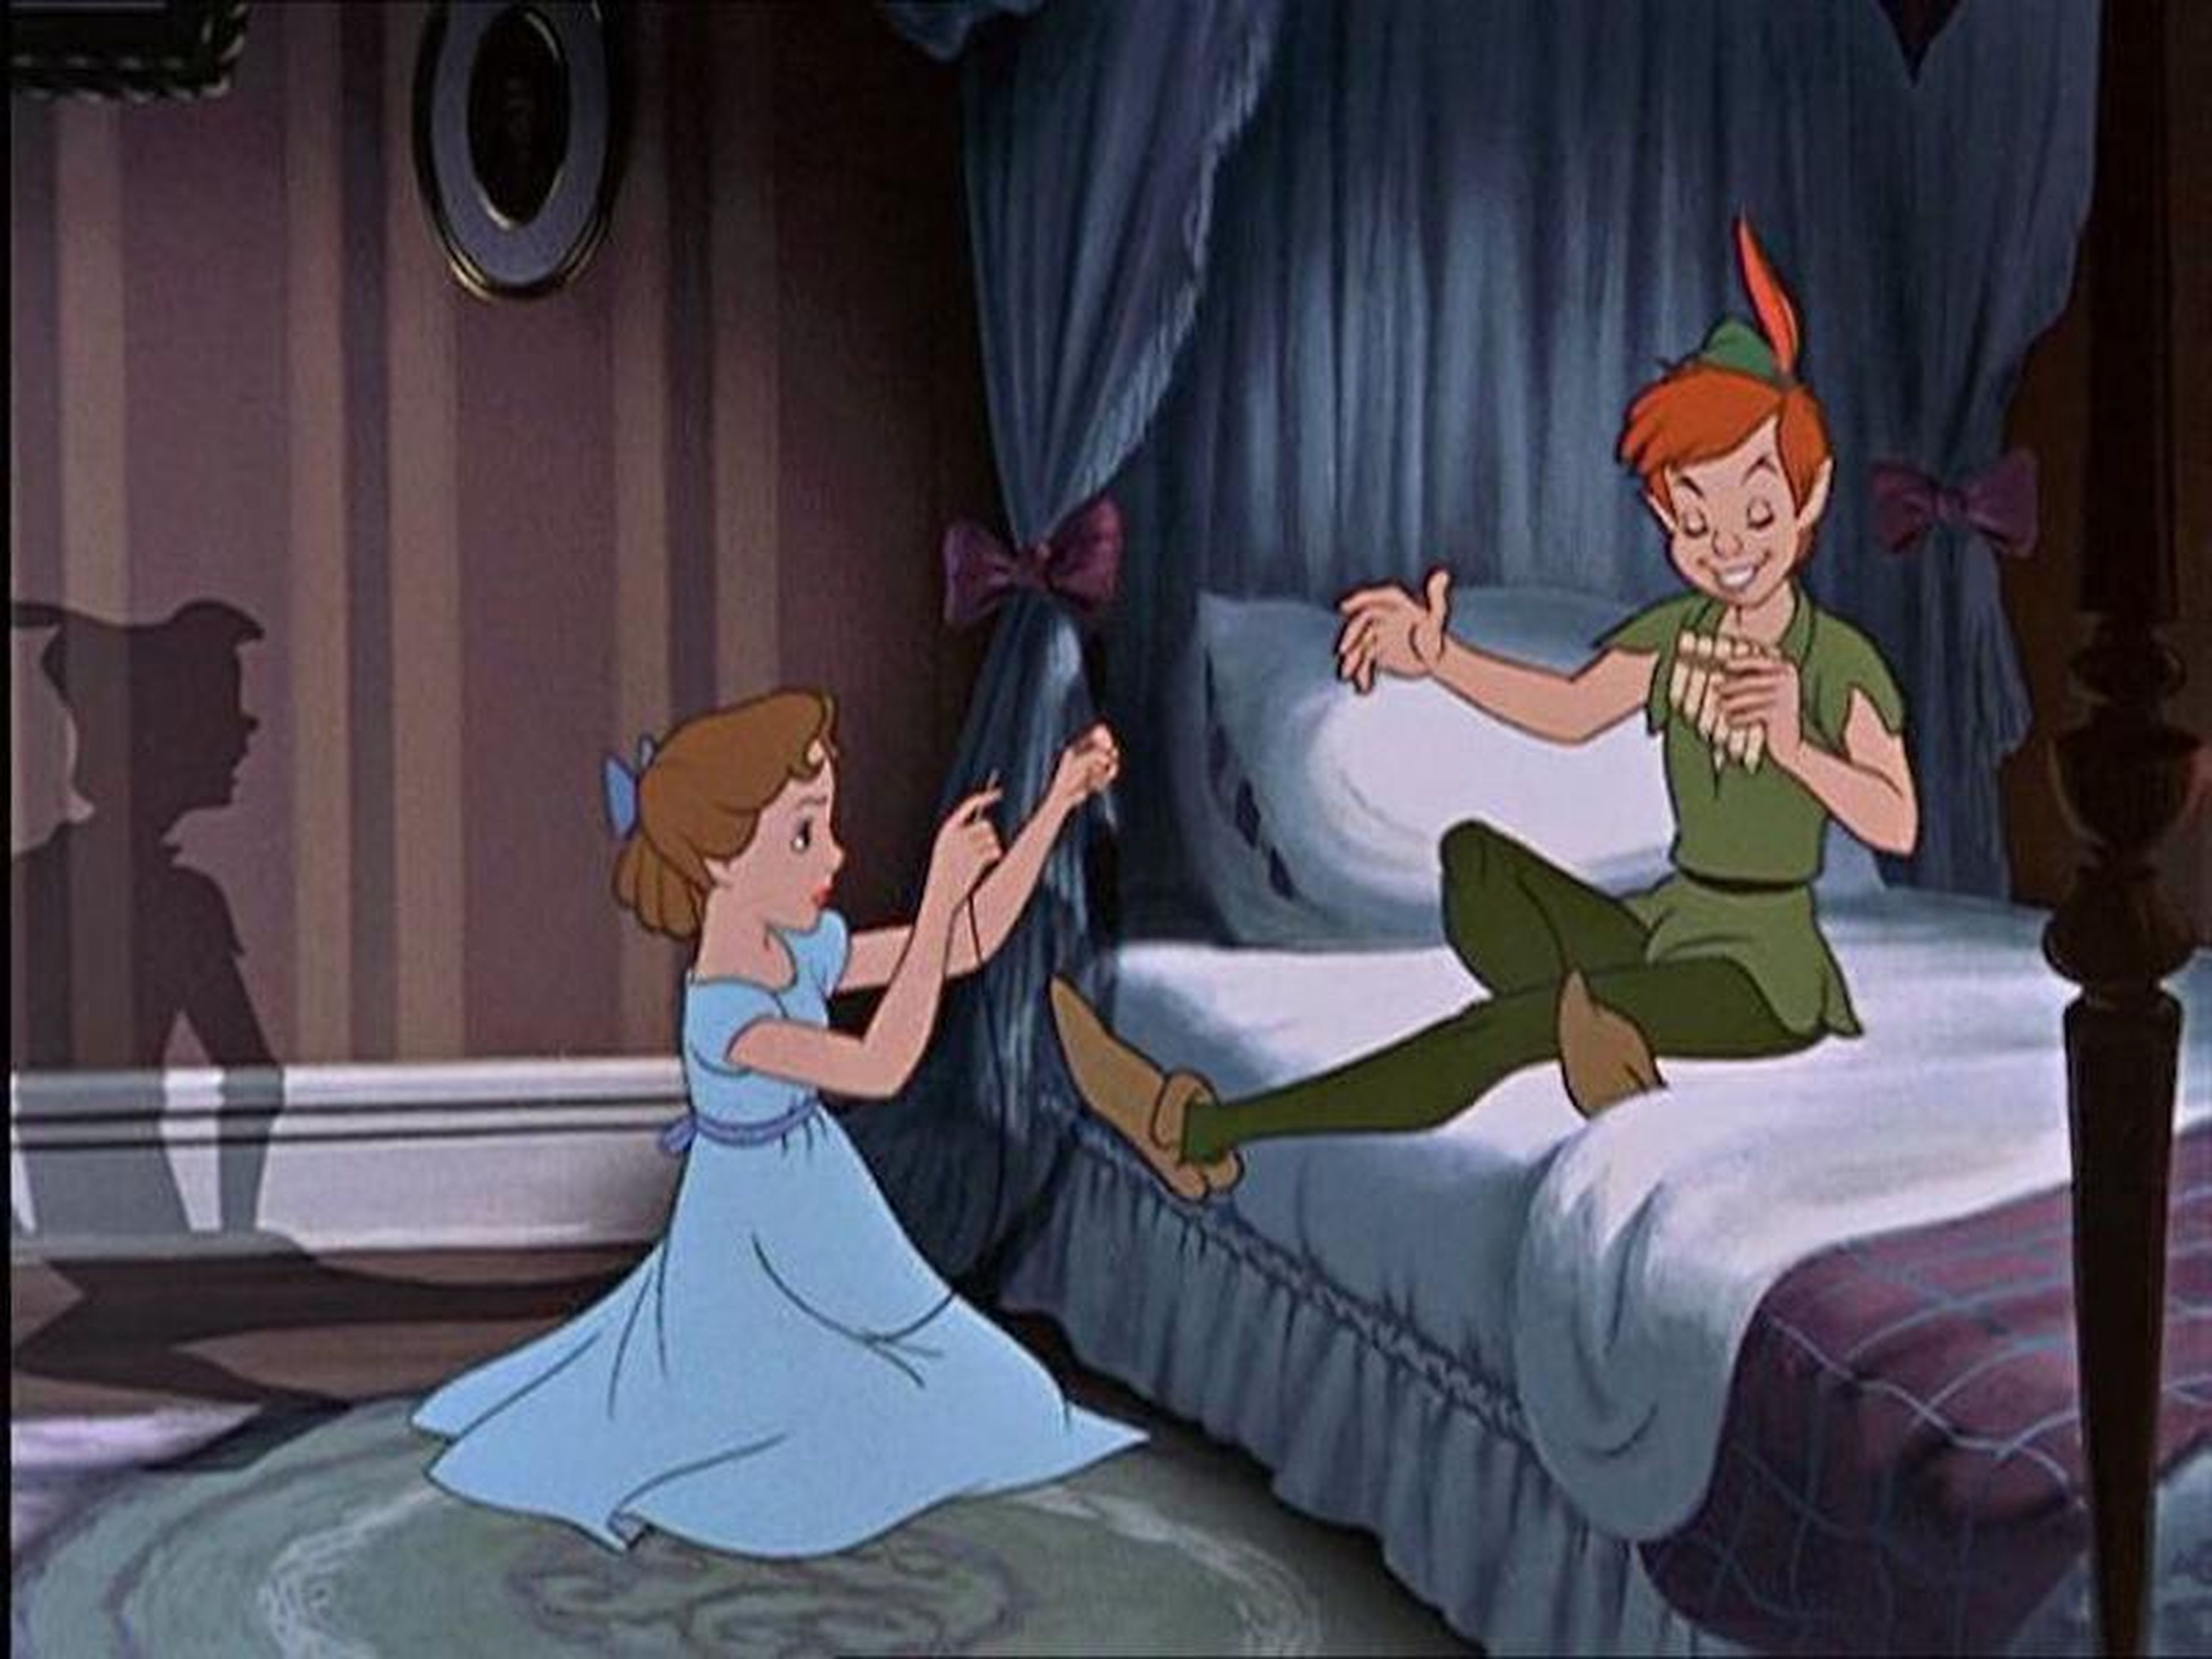 A scene from "Peter Pan."